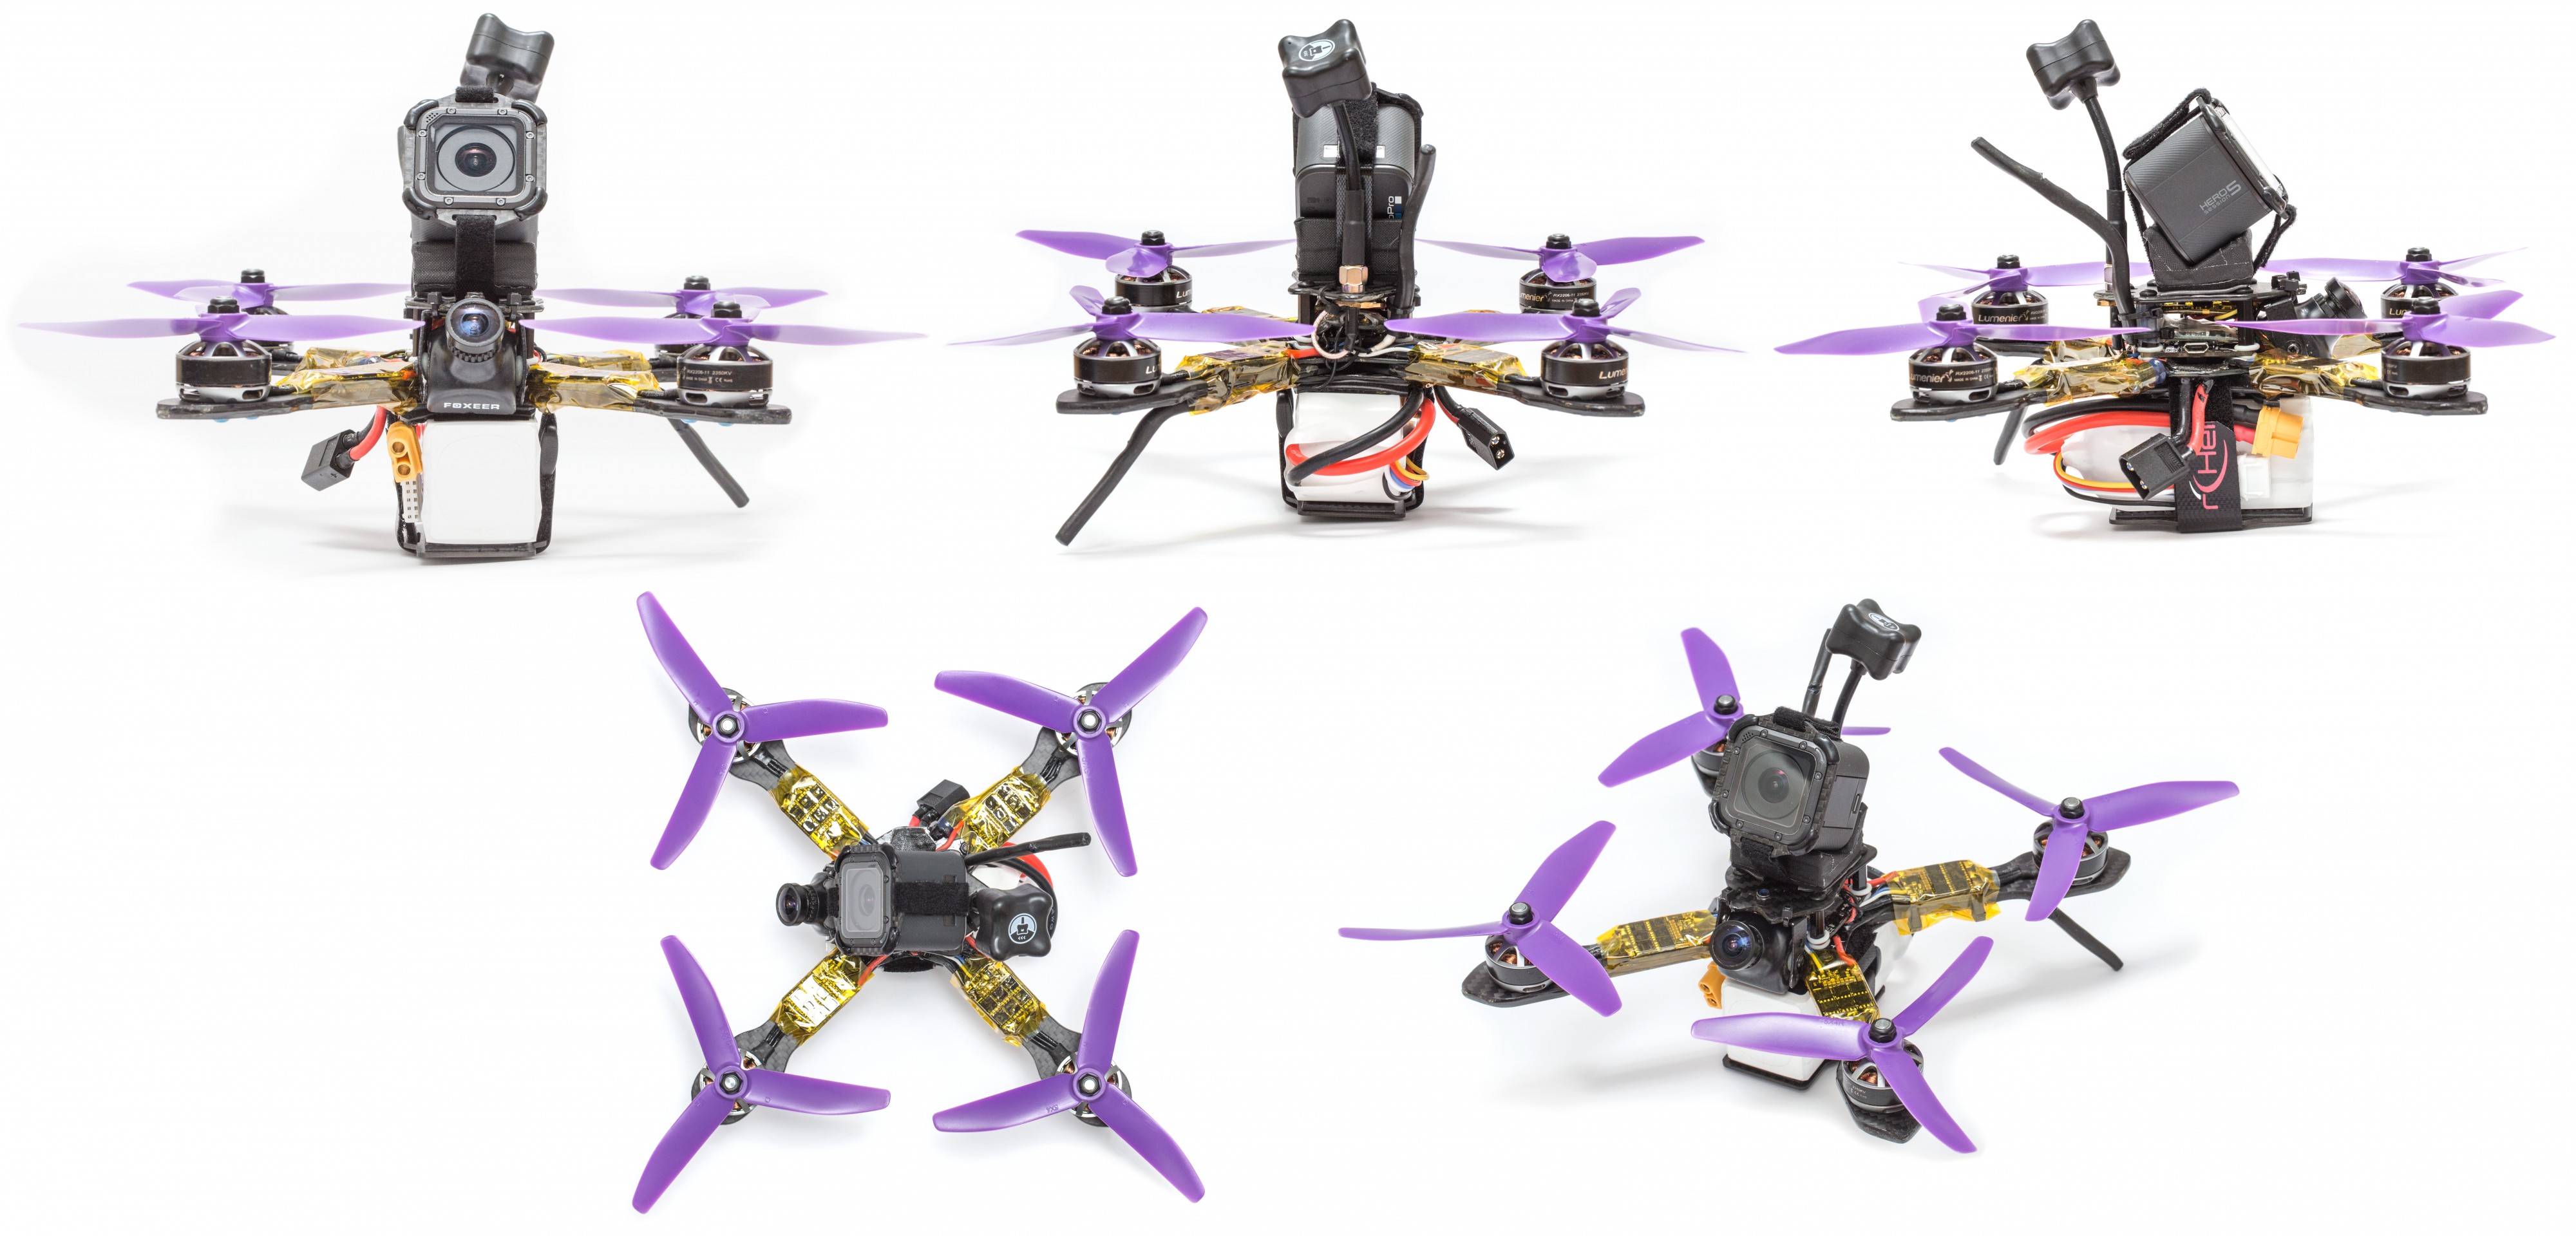 Xlabs Shrike-200 V2 5″ FPV quad with components collage